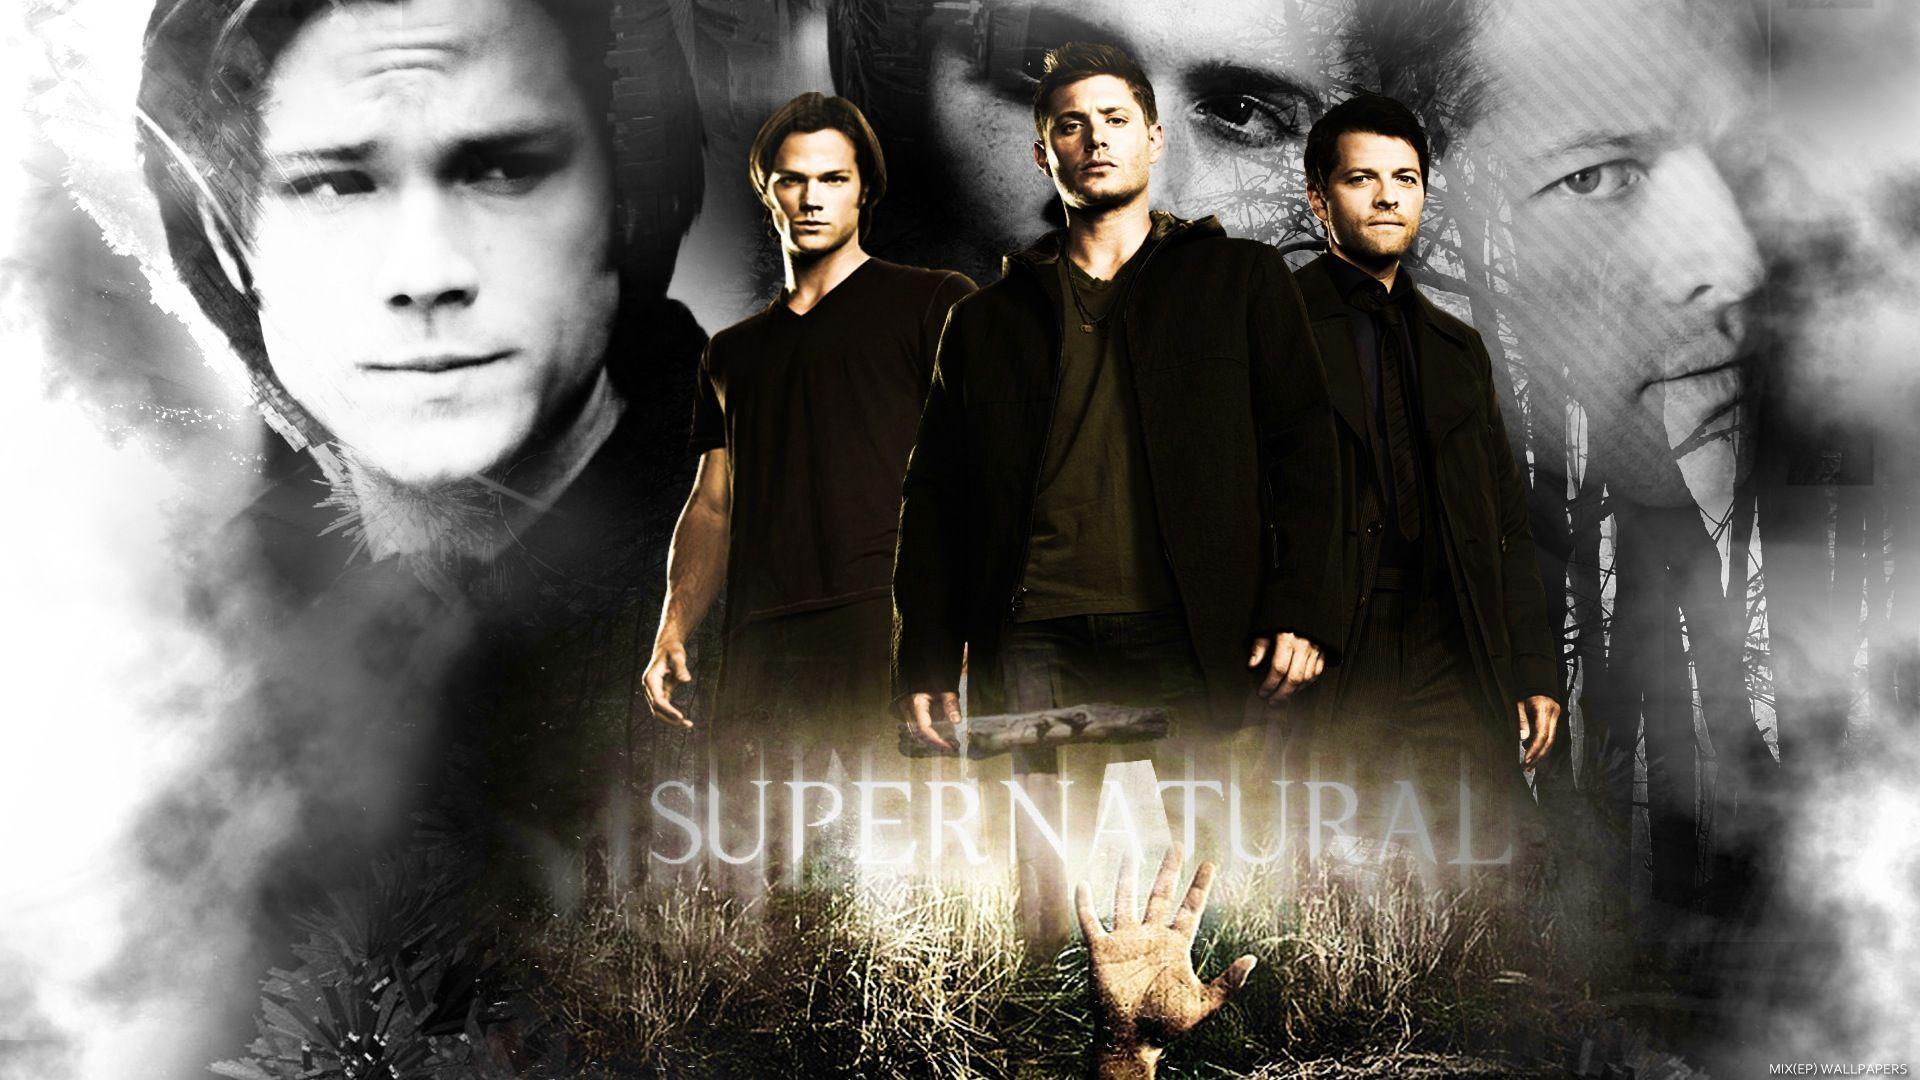 Extremely Creative Supernatural Wallpaper